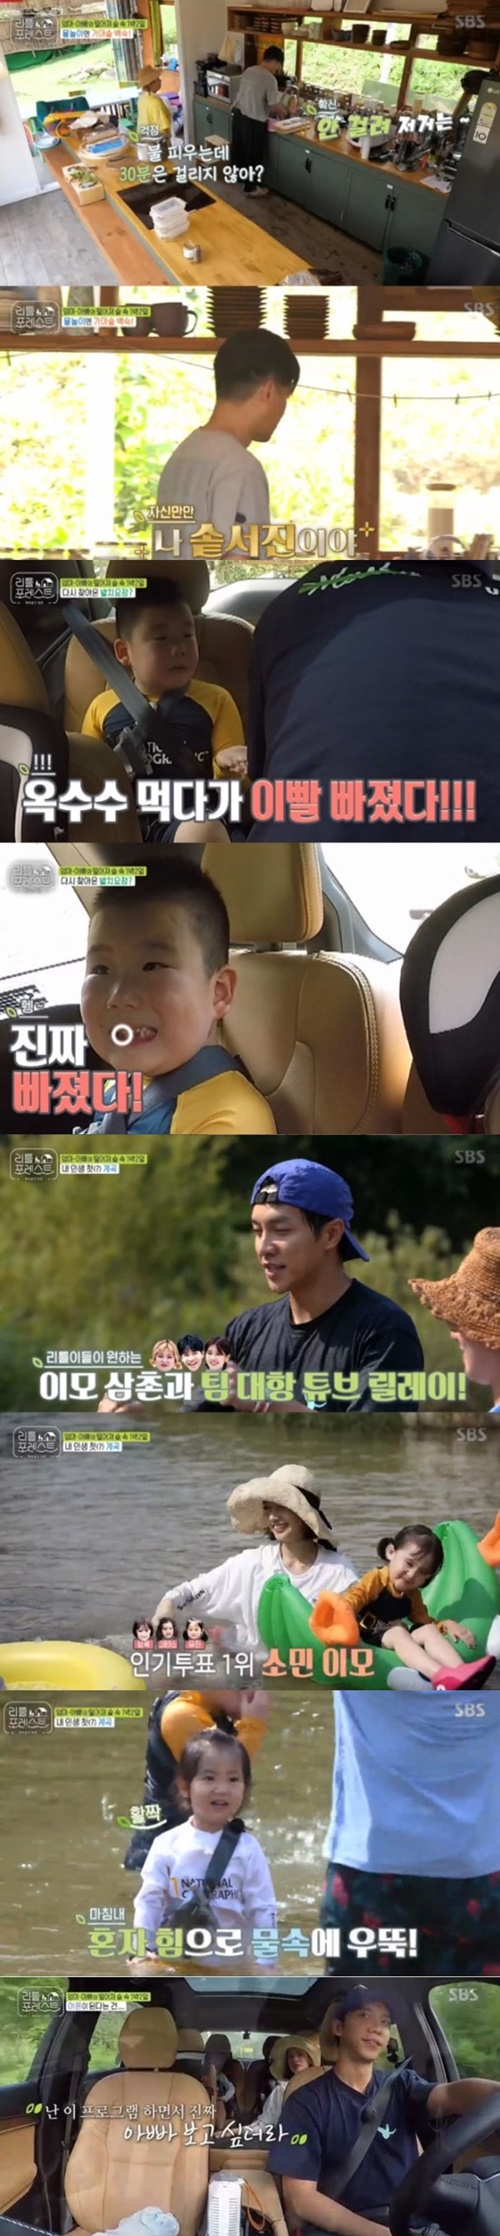 Little Forest Actor Lee Seung-gi made a feeling when filming.According to Nielsen Korea, a ratings agency on the 3rd, the SBS entertainment program Little Forest, which was broadcast on the afternoon of the 2nd, beat all major programs in the same time zone, including Exploration Planning Straight and Drama Please Tell Your Song, with an average audience rating of 4.3% and 5.1%.On this day, the members and Littles valley water play were drawn.Lee Seo-jin and Park Na-rae are preparing for the summer specials for the Littles, and Lee Seo-jin decided to do chicken grooming on behalf of Park Na-rae, who has chicken phobia.However, Lee Seo-jin was increasingly manipulated by Park Na-rae cooking bot and laughed.In the meantime, Lee Seo-jin, who is a cooked Seojin, said, I am a specialist in the fireplace. However, he suffered unexpected sufferings by burning unexpected heat waves.In addition, Lee Han-yi suffered another tooth-sucking death. Lee felt this shaking in the garden, and Lee Seung-gi said, Lets pull it out with corn hair.It is the first time in Korea, he persuaded, but it did not work.In the end, Lee fell out of his teeth while eating boiled corn in the car, and gave Lee Seung-gi and Lee Seo-jin a big smile.Littles later enjoyed full-scale valley water play, but Eugene felt afraid of water play, and eventually fell into the water while trying to ride a frog tube.At that moment, Jung So-min reached out to hold Eugenei and Eugenei did not cry.Jung So-min said, I told him that I should not be embarrassed, so I said it was okay, but Baro said it casually. He felt the importance of communicating with children.Meanwhile, popular votes among members were also held.Lee Han-i and Jung Heon-yi selected Lee Seung-gi, Brooke and Grace, and Eugene Lee Jung So-min, and Park Na-rae won the unexpected Little boys and members went back to the car after a water play.Lee Seung-gi, who watched the children sleep in the car, said, My appearance has been seen from our Father. I want to see Father while Little Forest.The scene was the highest audience rating of 6.3% per minute, and it was the best one minute.